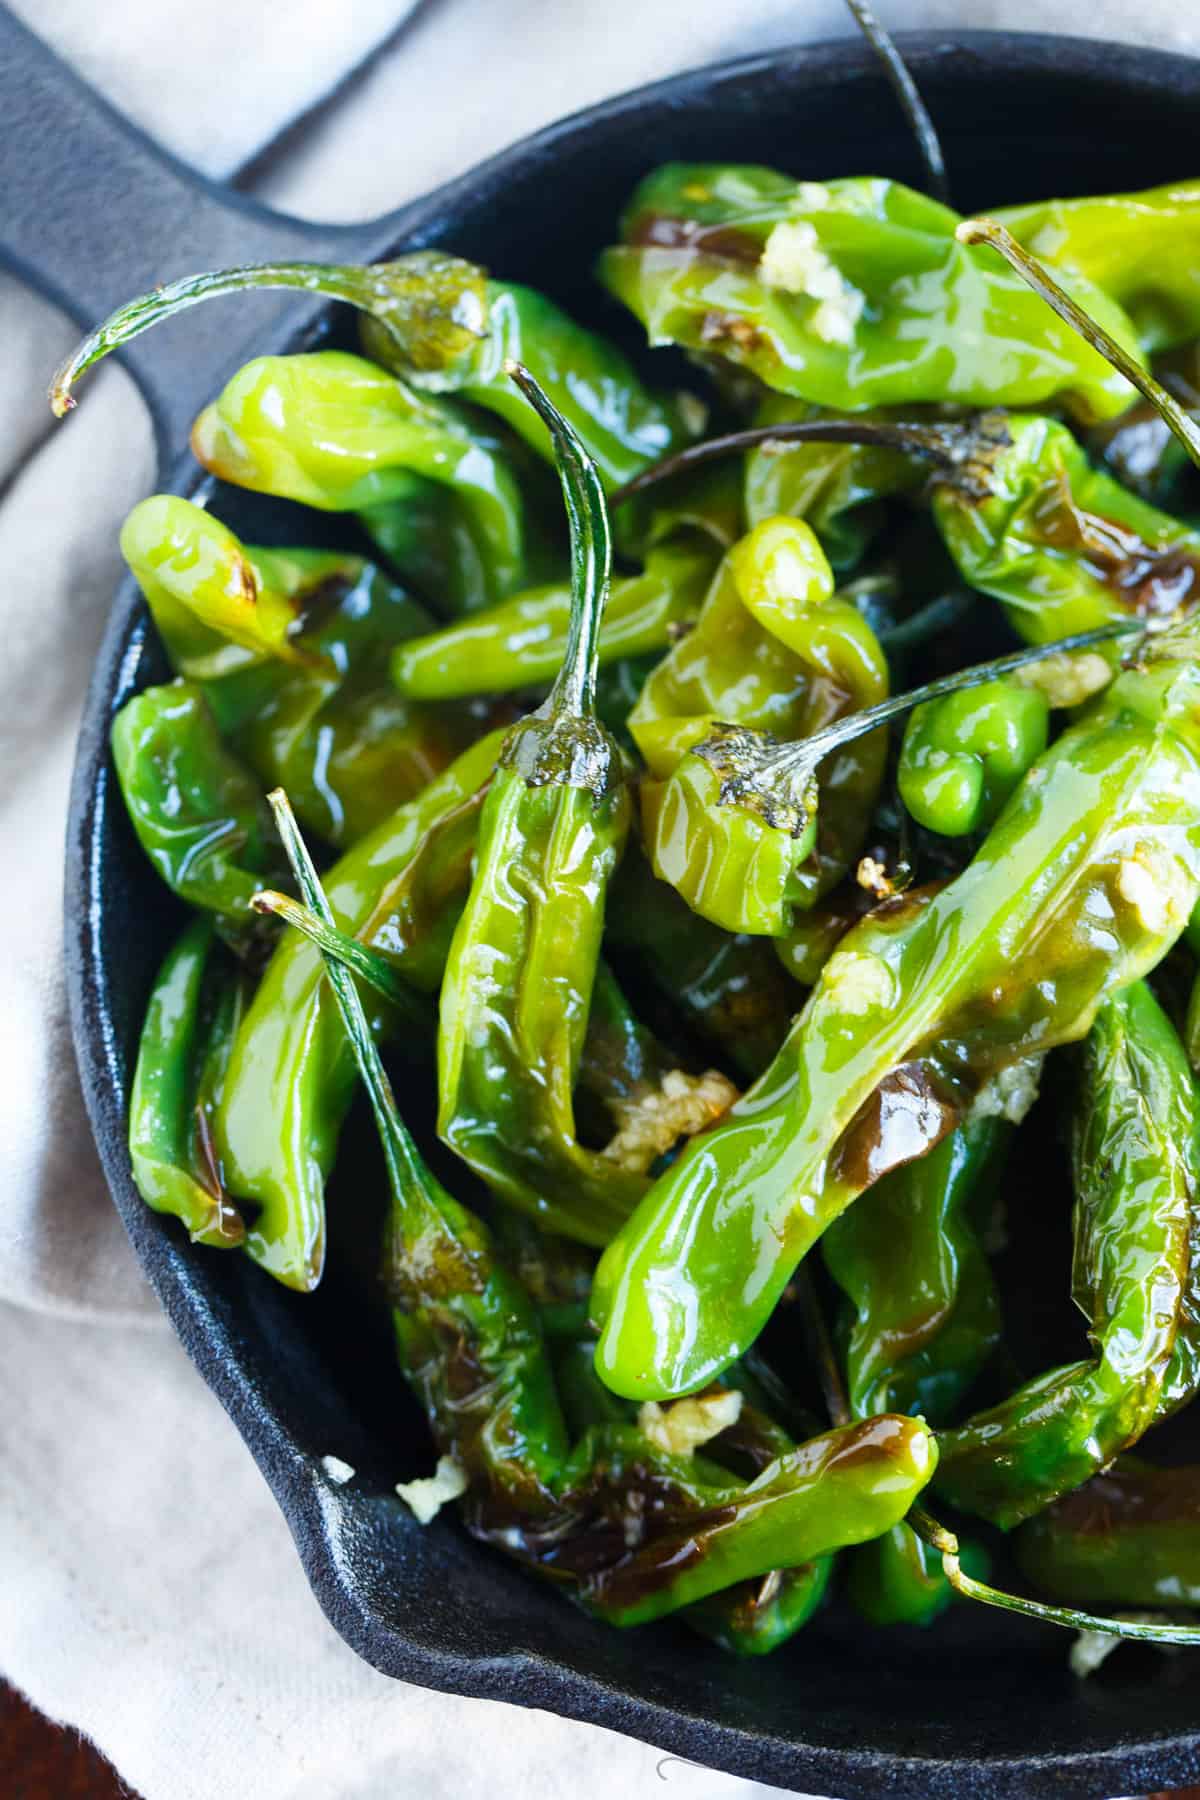 Blistered shishito peppers tossed in garlic and olive oil make for a great snack if you're feeling a little heat!